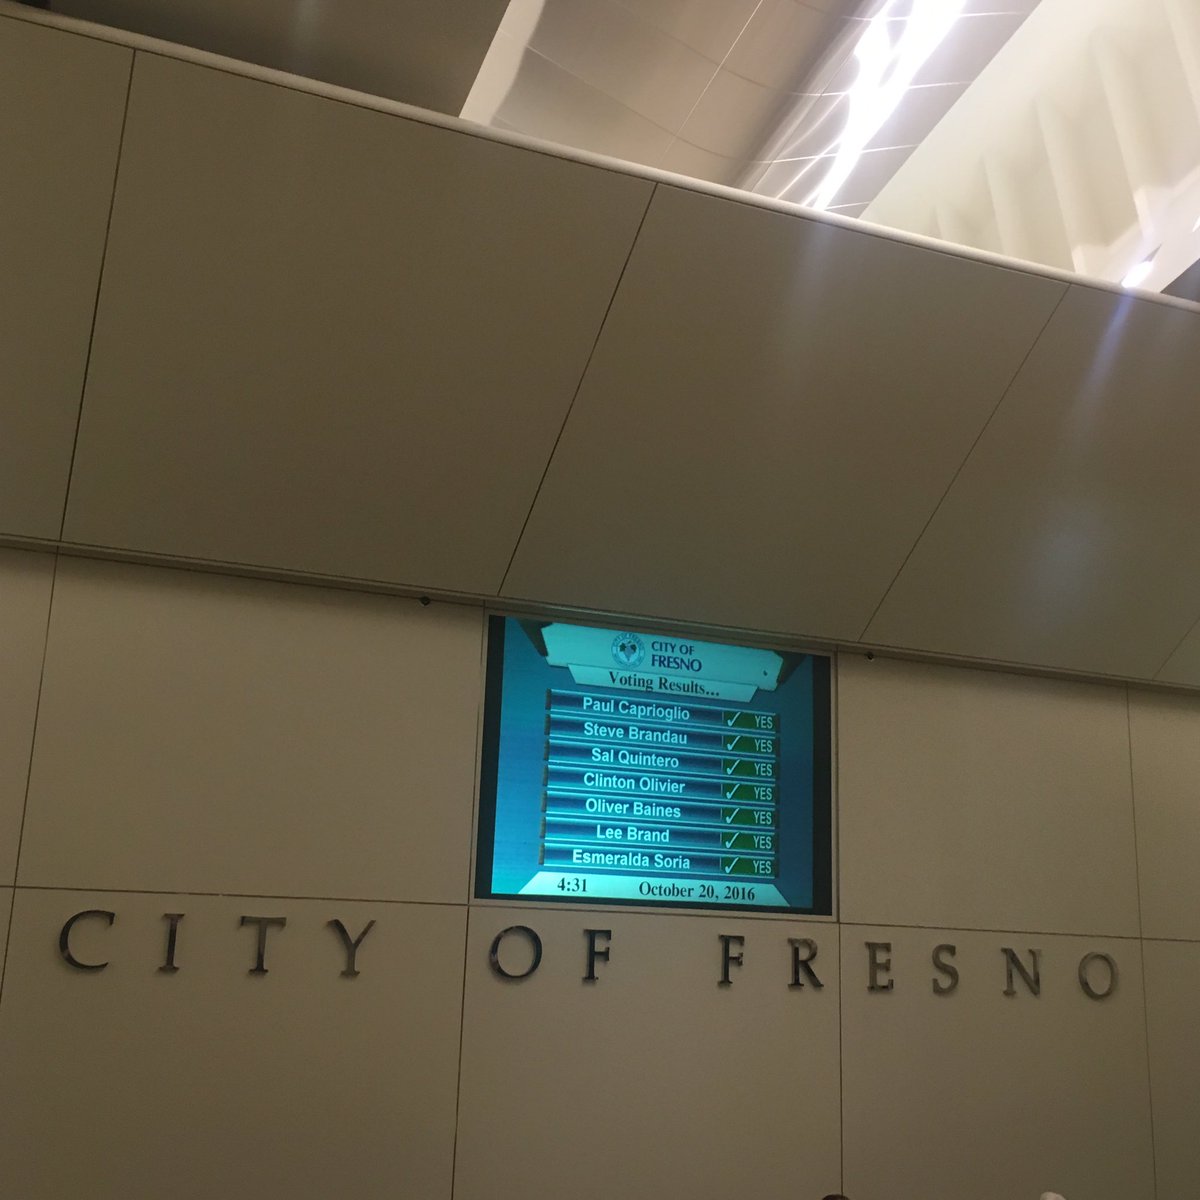 Big day for #downtownFresno. The downtown plan, specific plan, & development code passes 7-0! #downtownFresno  #investmentready